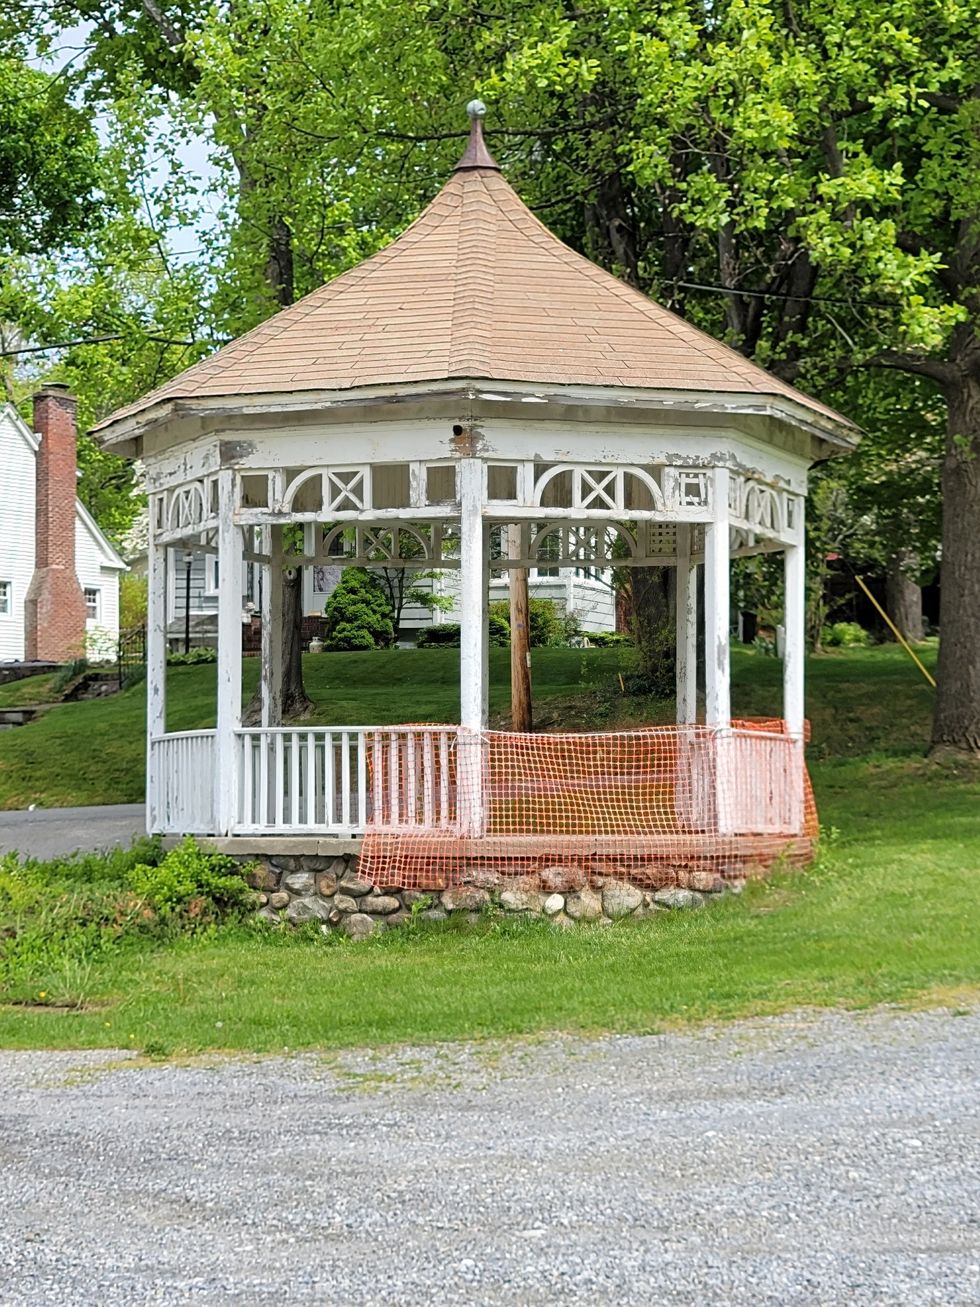 Can Elm Drive Gazebo be saved? FRIENDS group believes it can